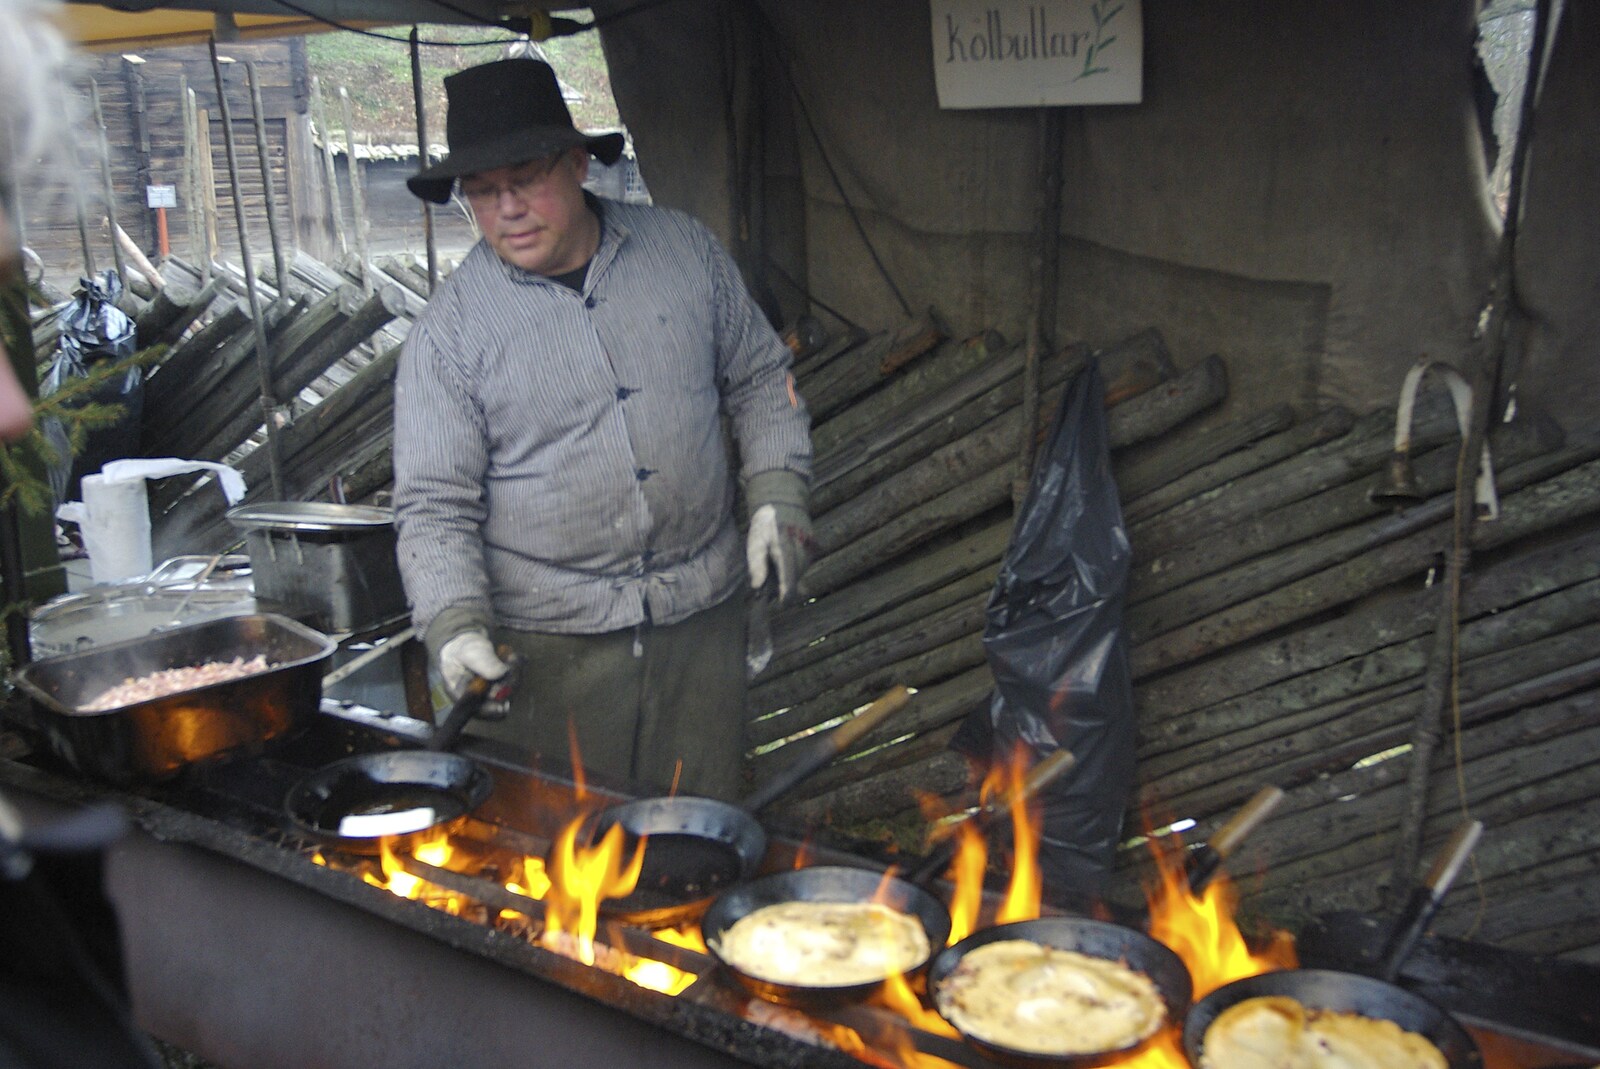 Thick pancakes are fried in a deep layer of fat from A Few Hours in Skansen, Stockholm, Sweden - 17th December 2007